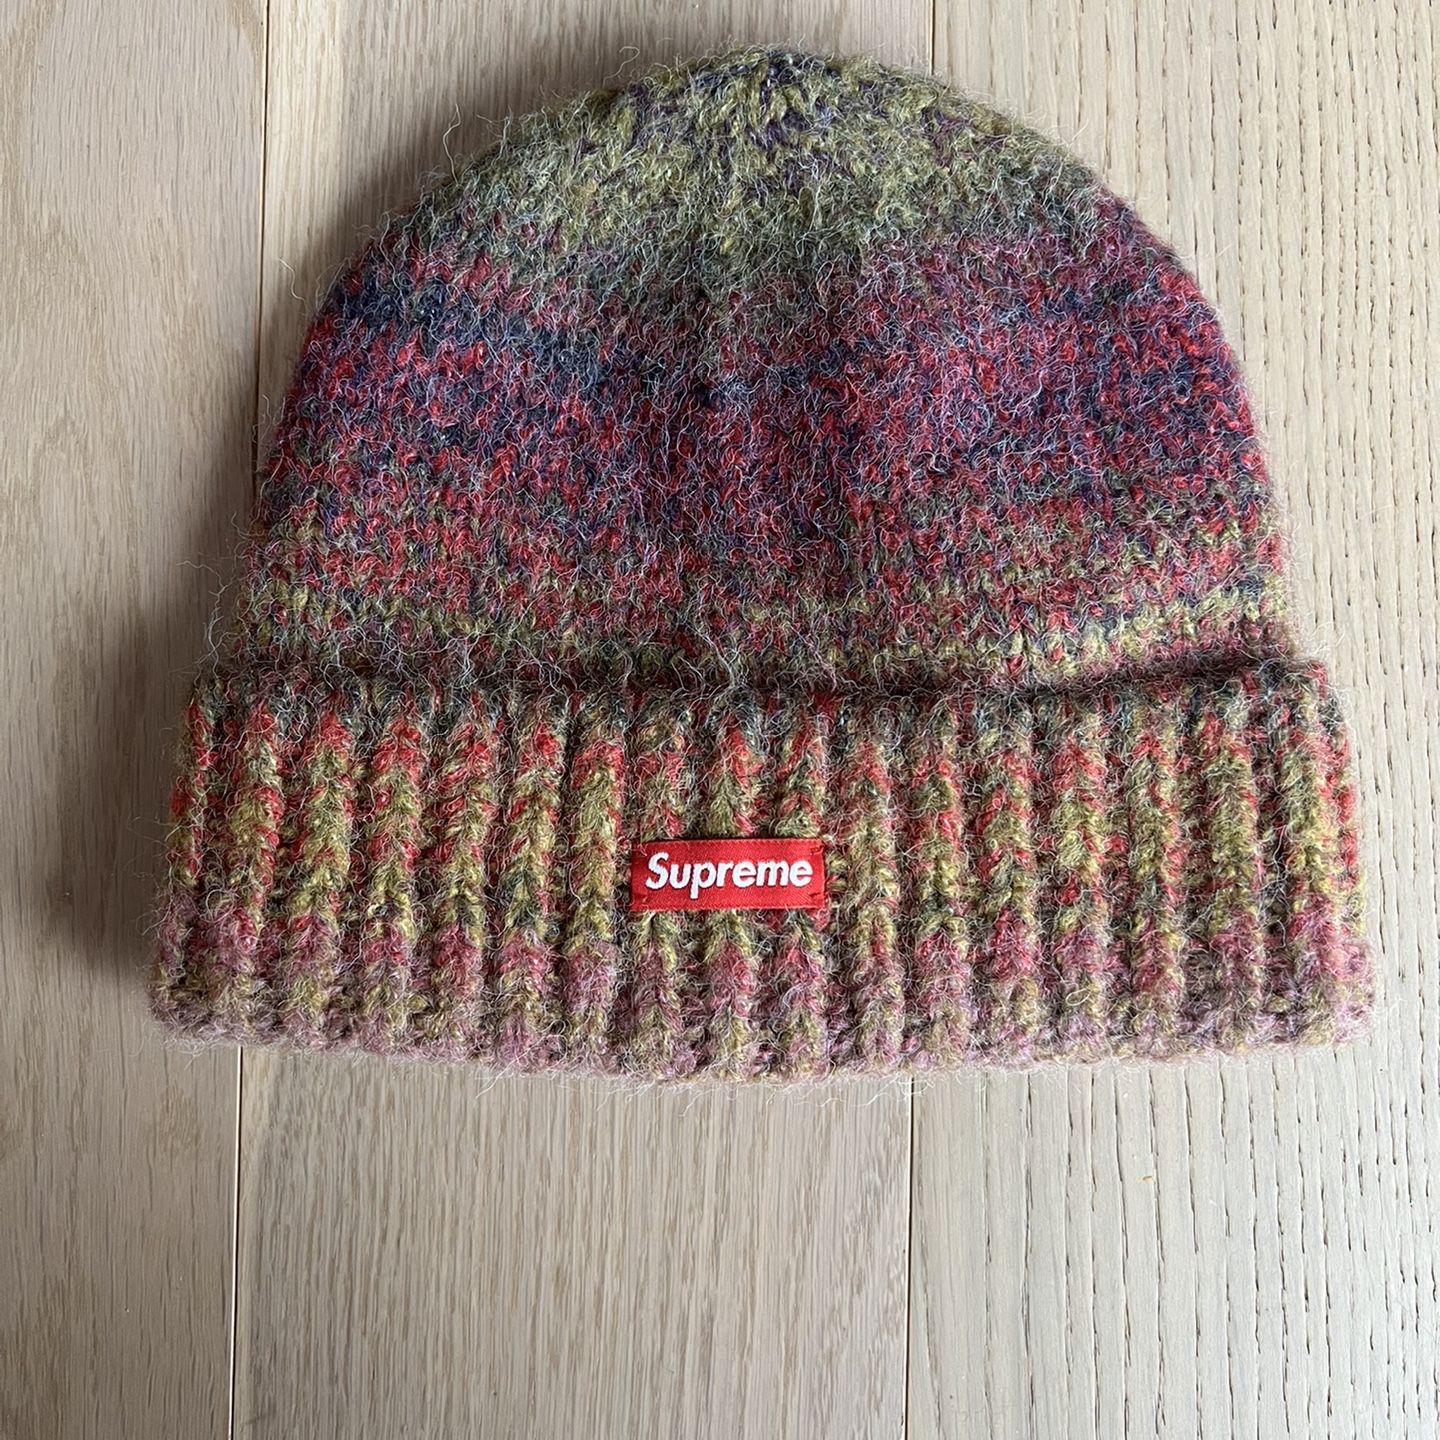 Supreme Gradient Stripes Beanie - red/purple - NEW for Sale in New